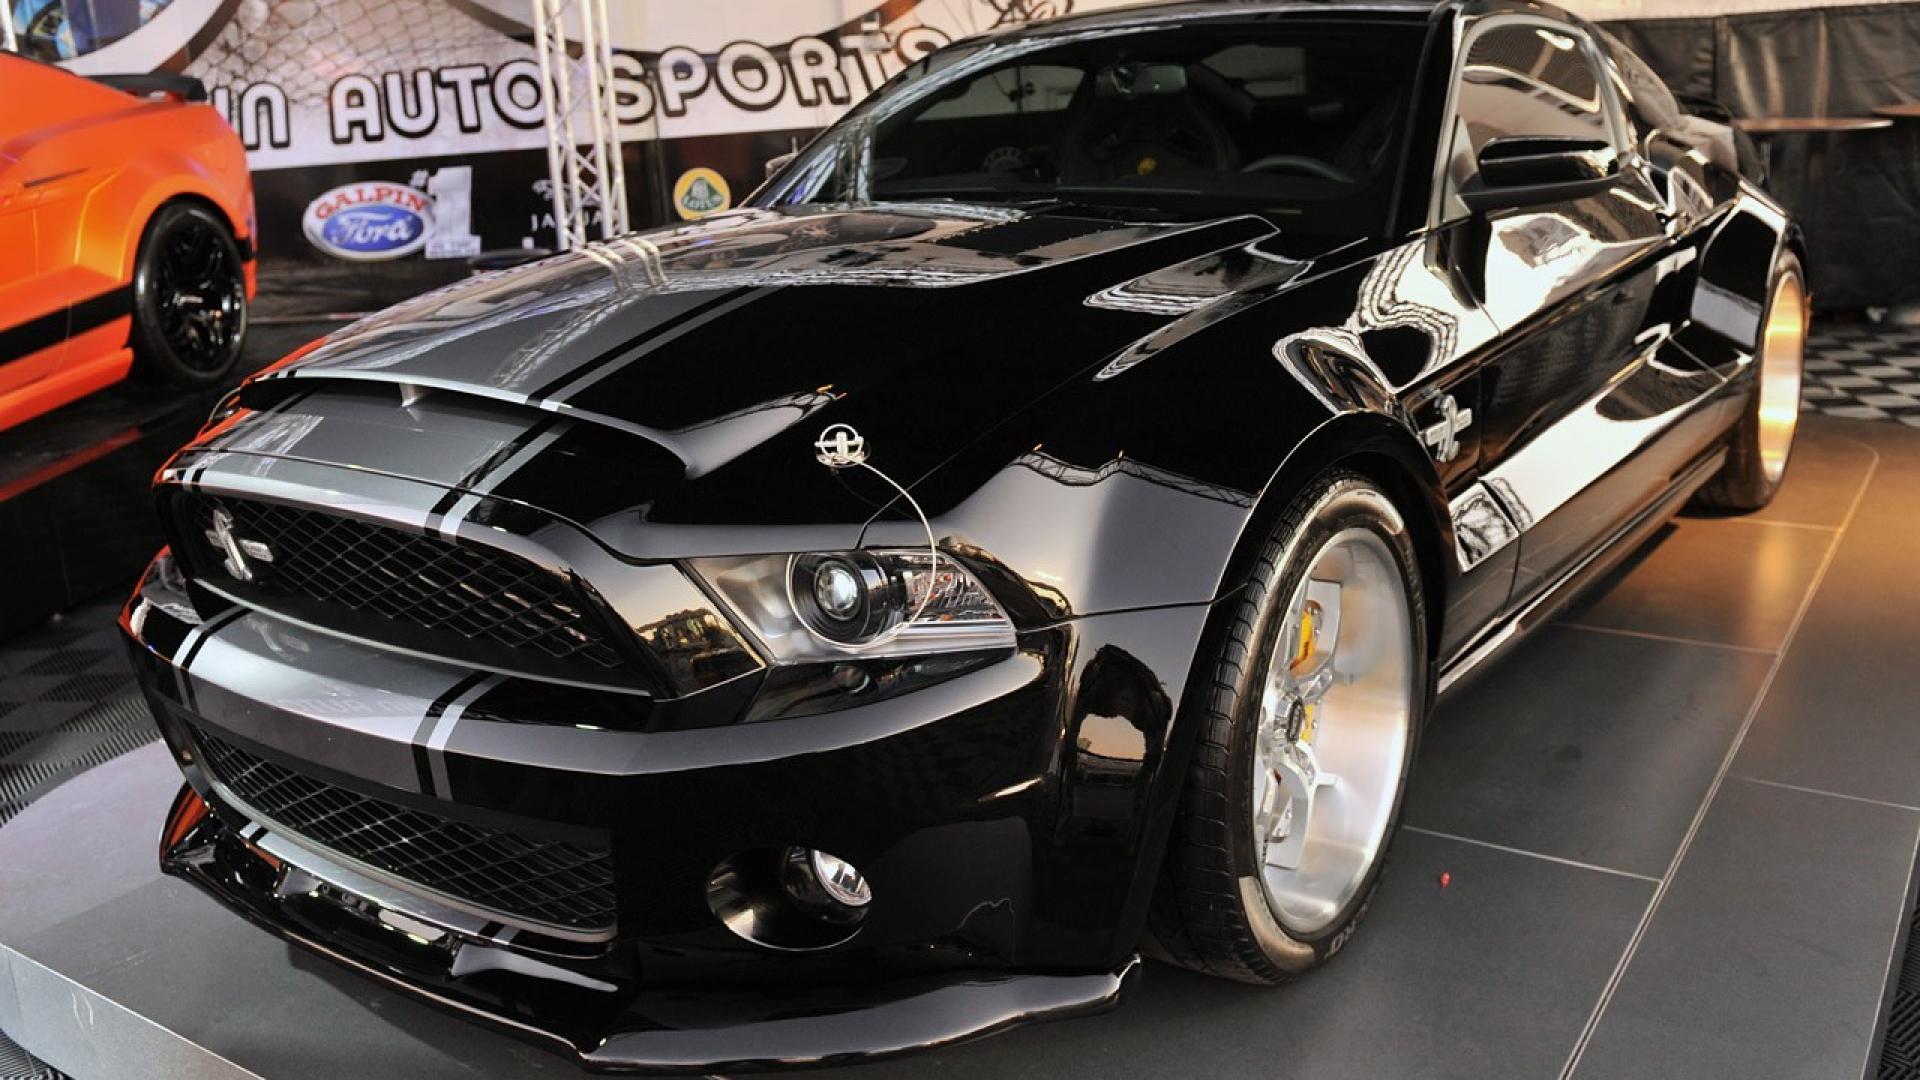 Ford Mustang Shelby gt500 super Snake Widebody